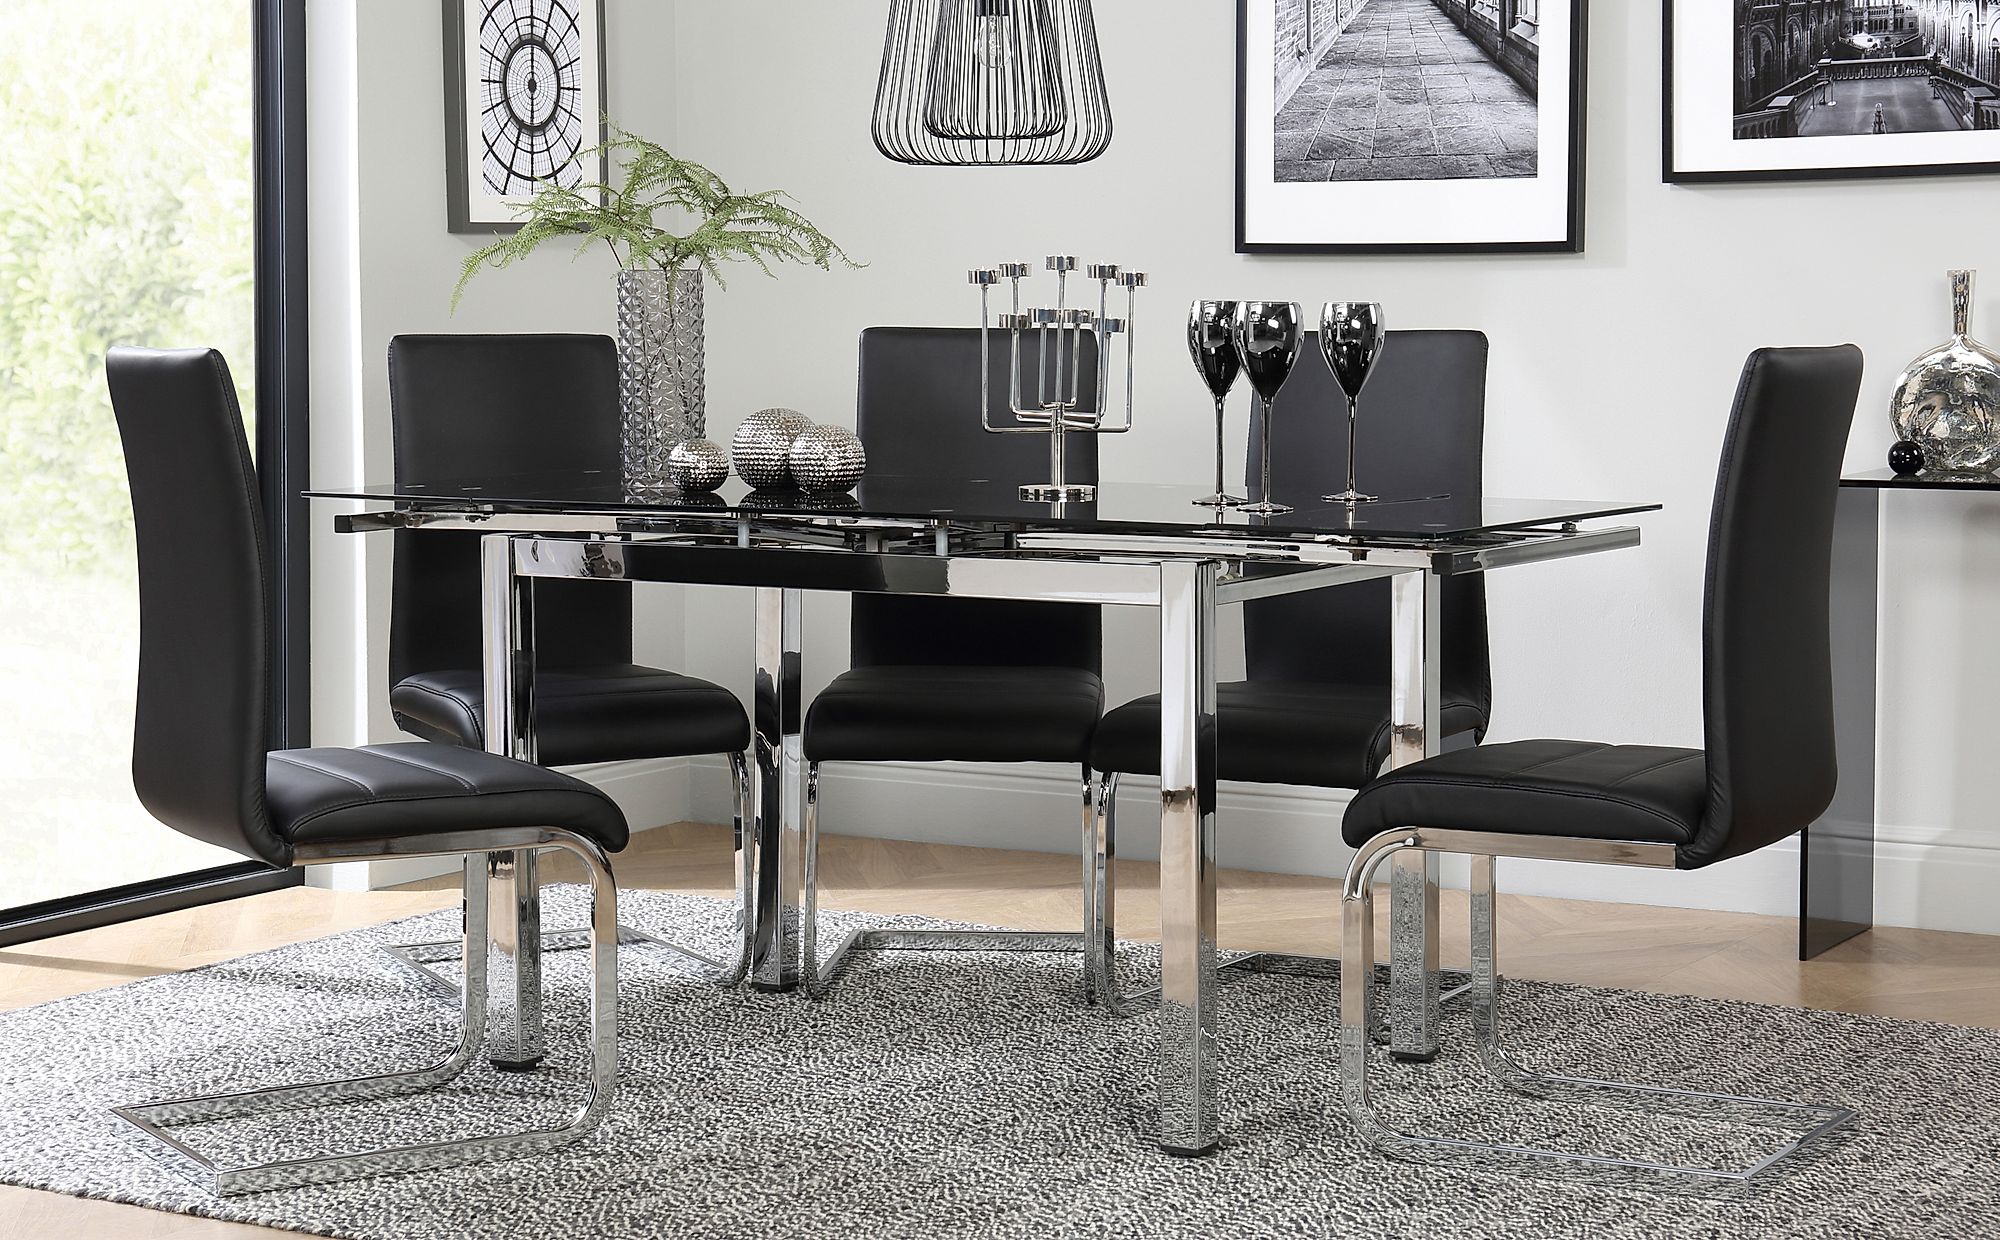 Glass Dining Room Table With Black Chairs - Joeryo ideas